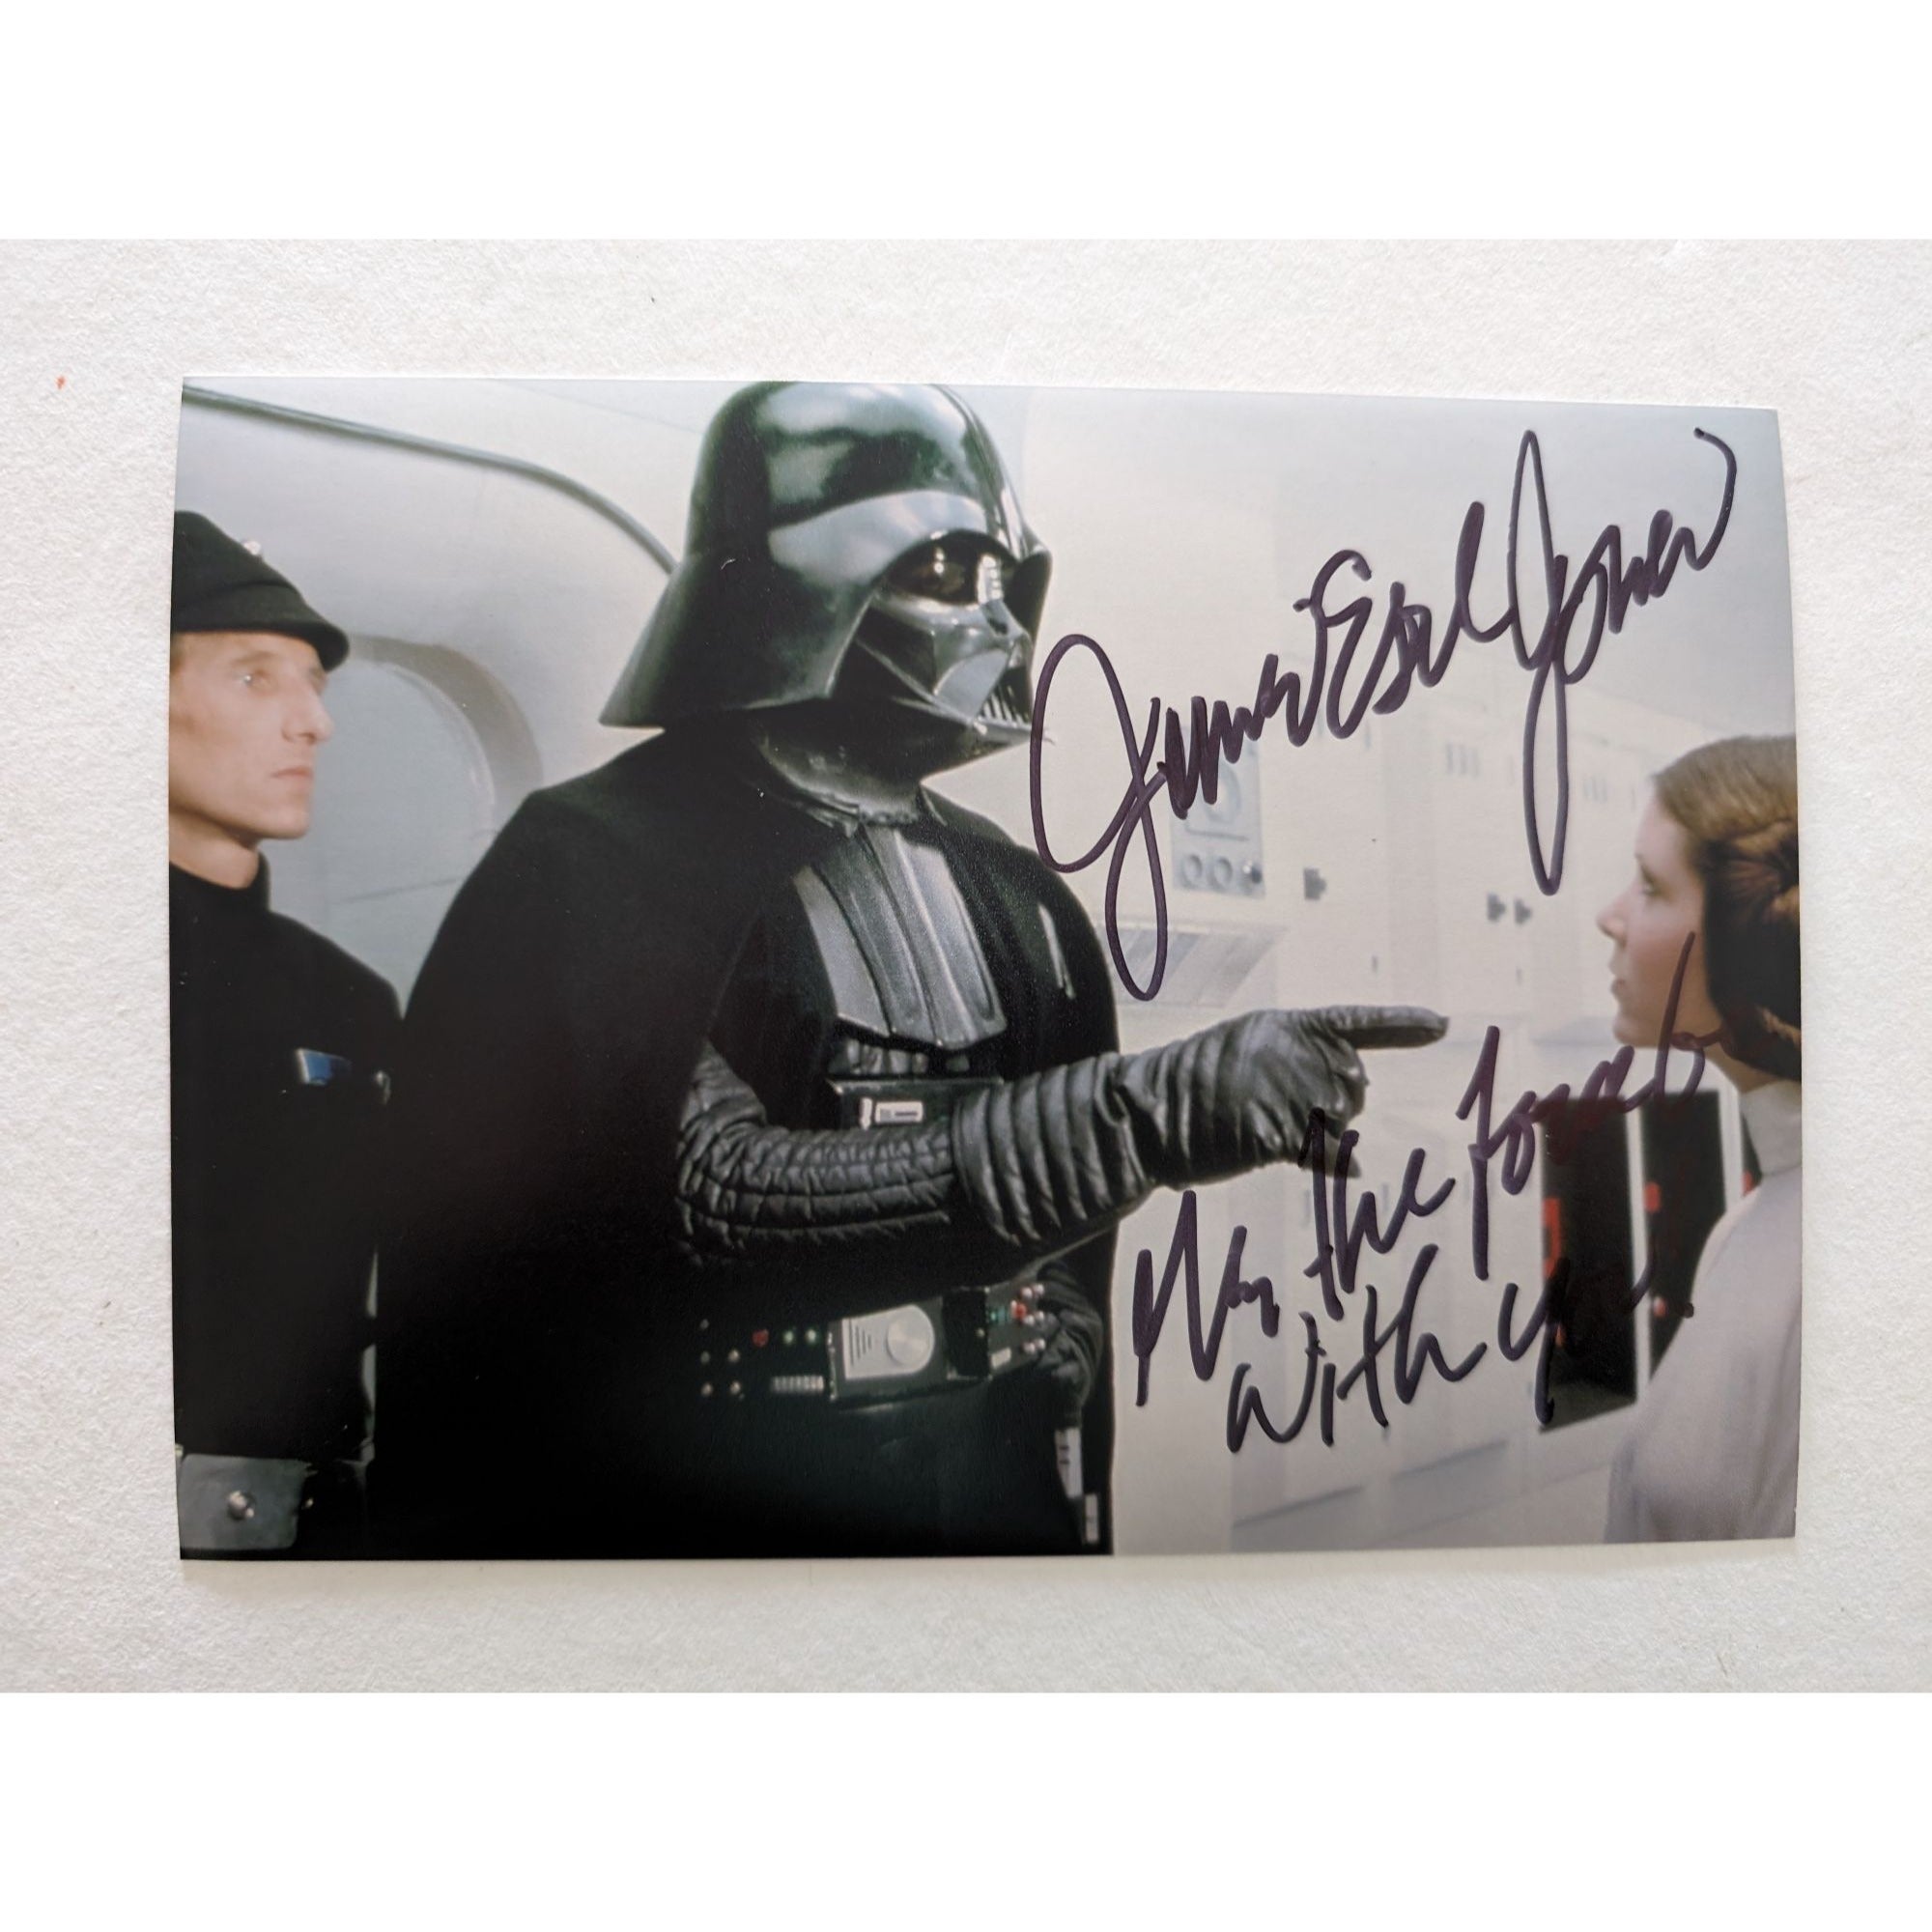 James Earl Jones Darth Vader Star Wars 5x7 photo signed with proof